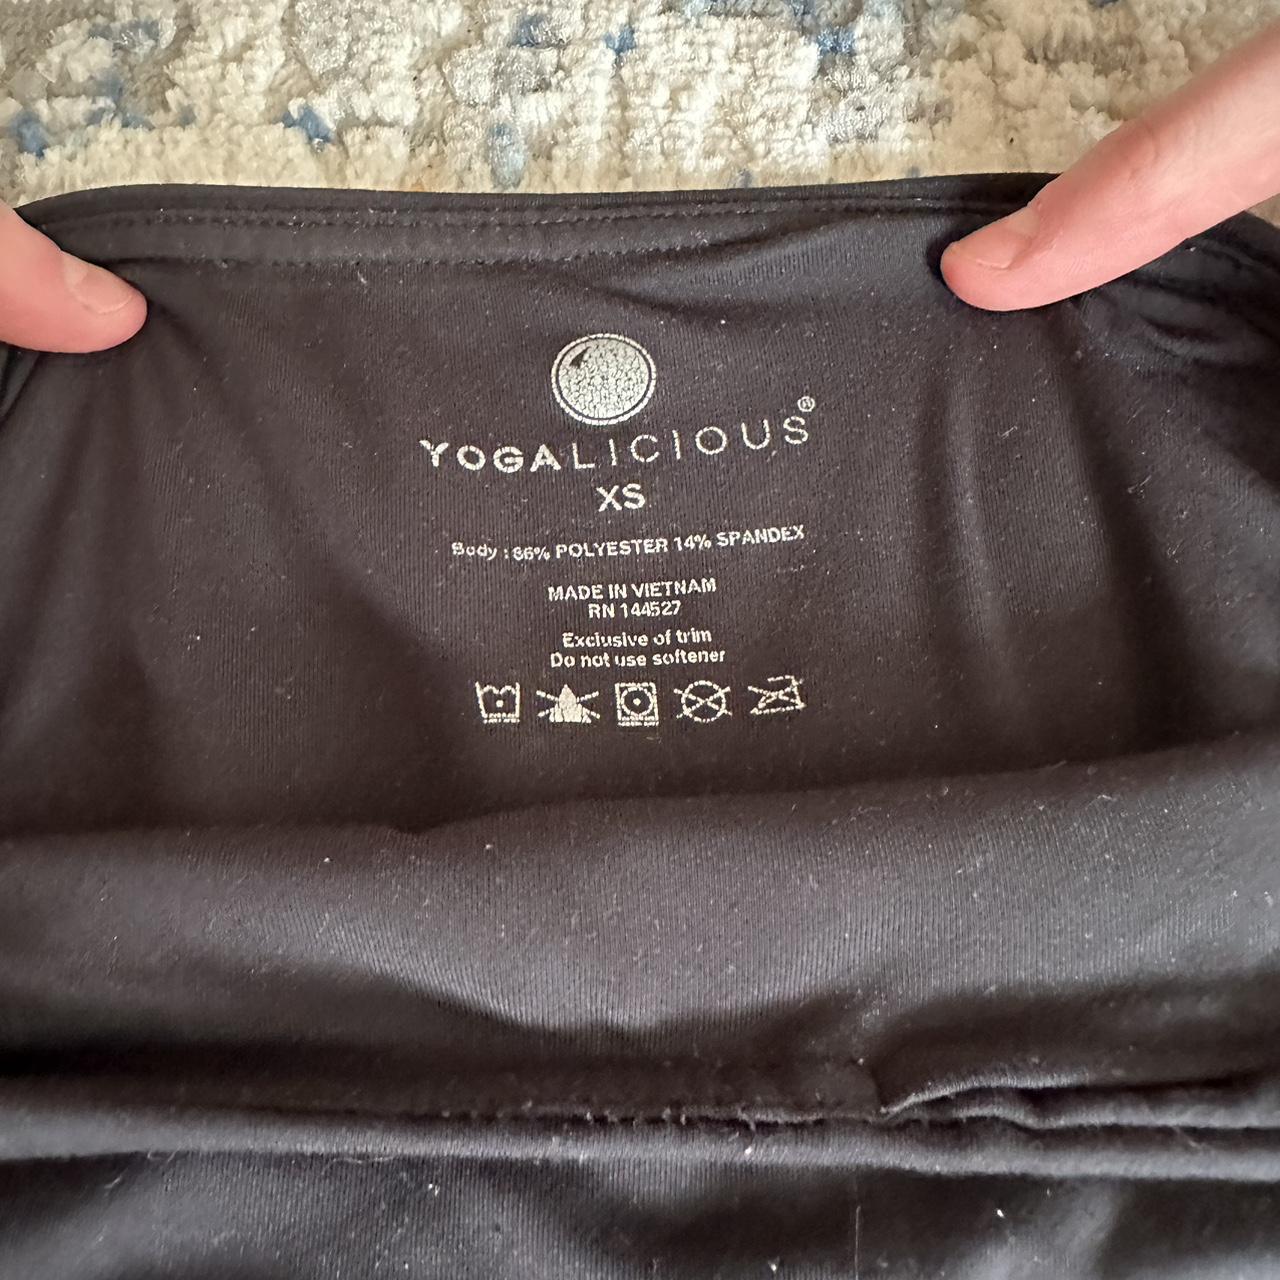 yogalicious women's top size small RN# 144527